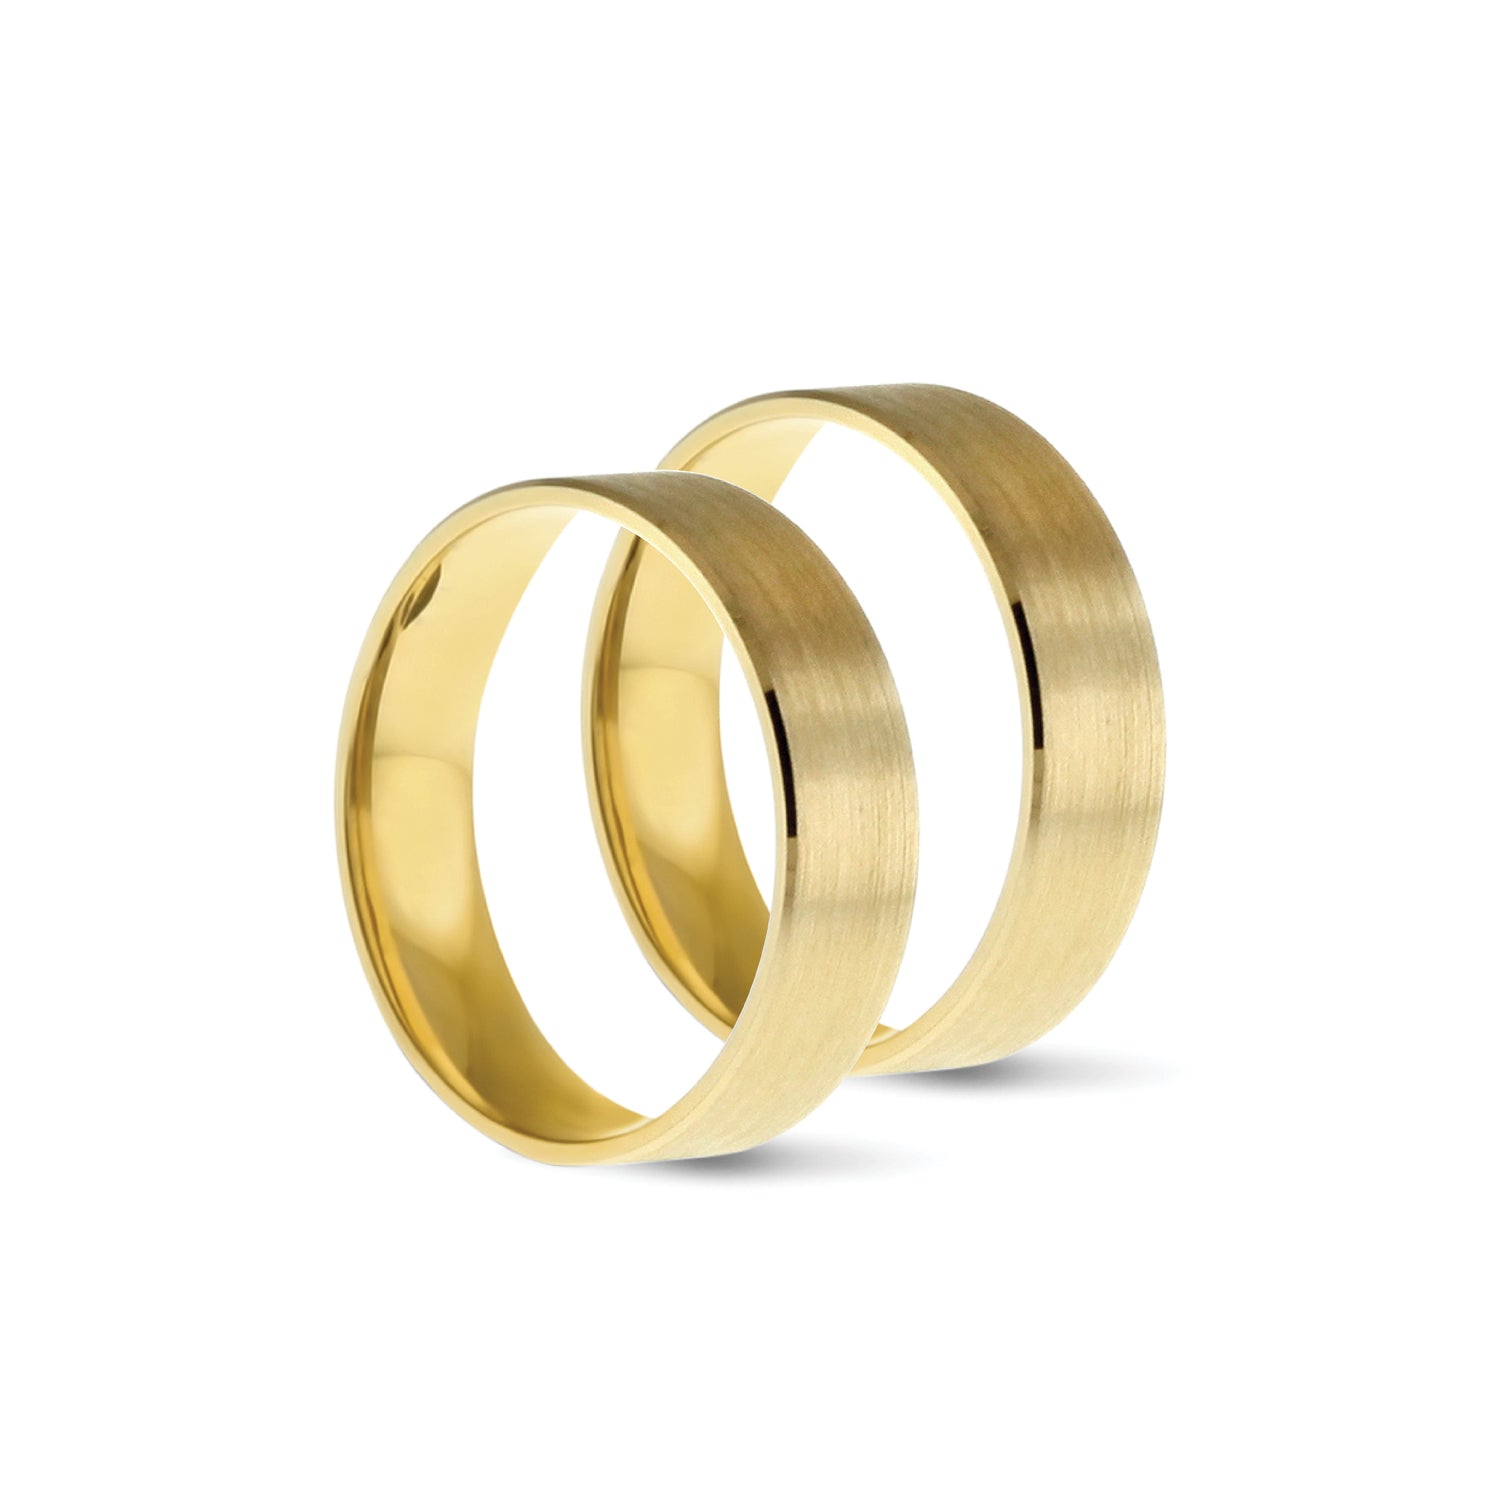 Wedding ring, engagement or commitment ring in yellow gold